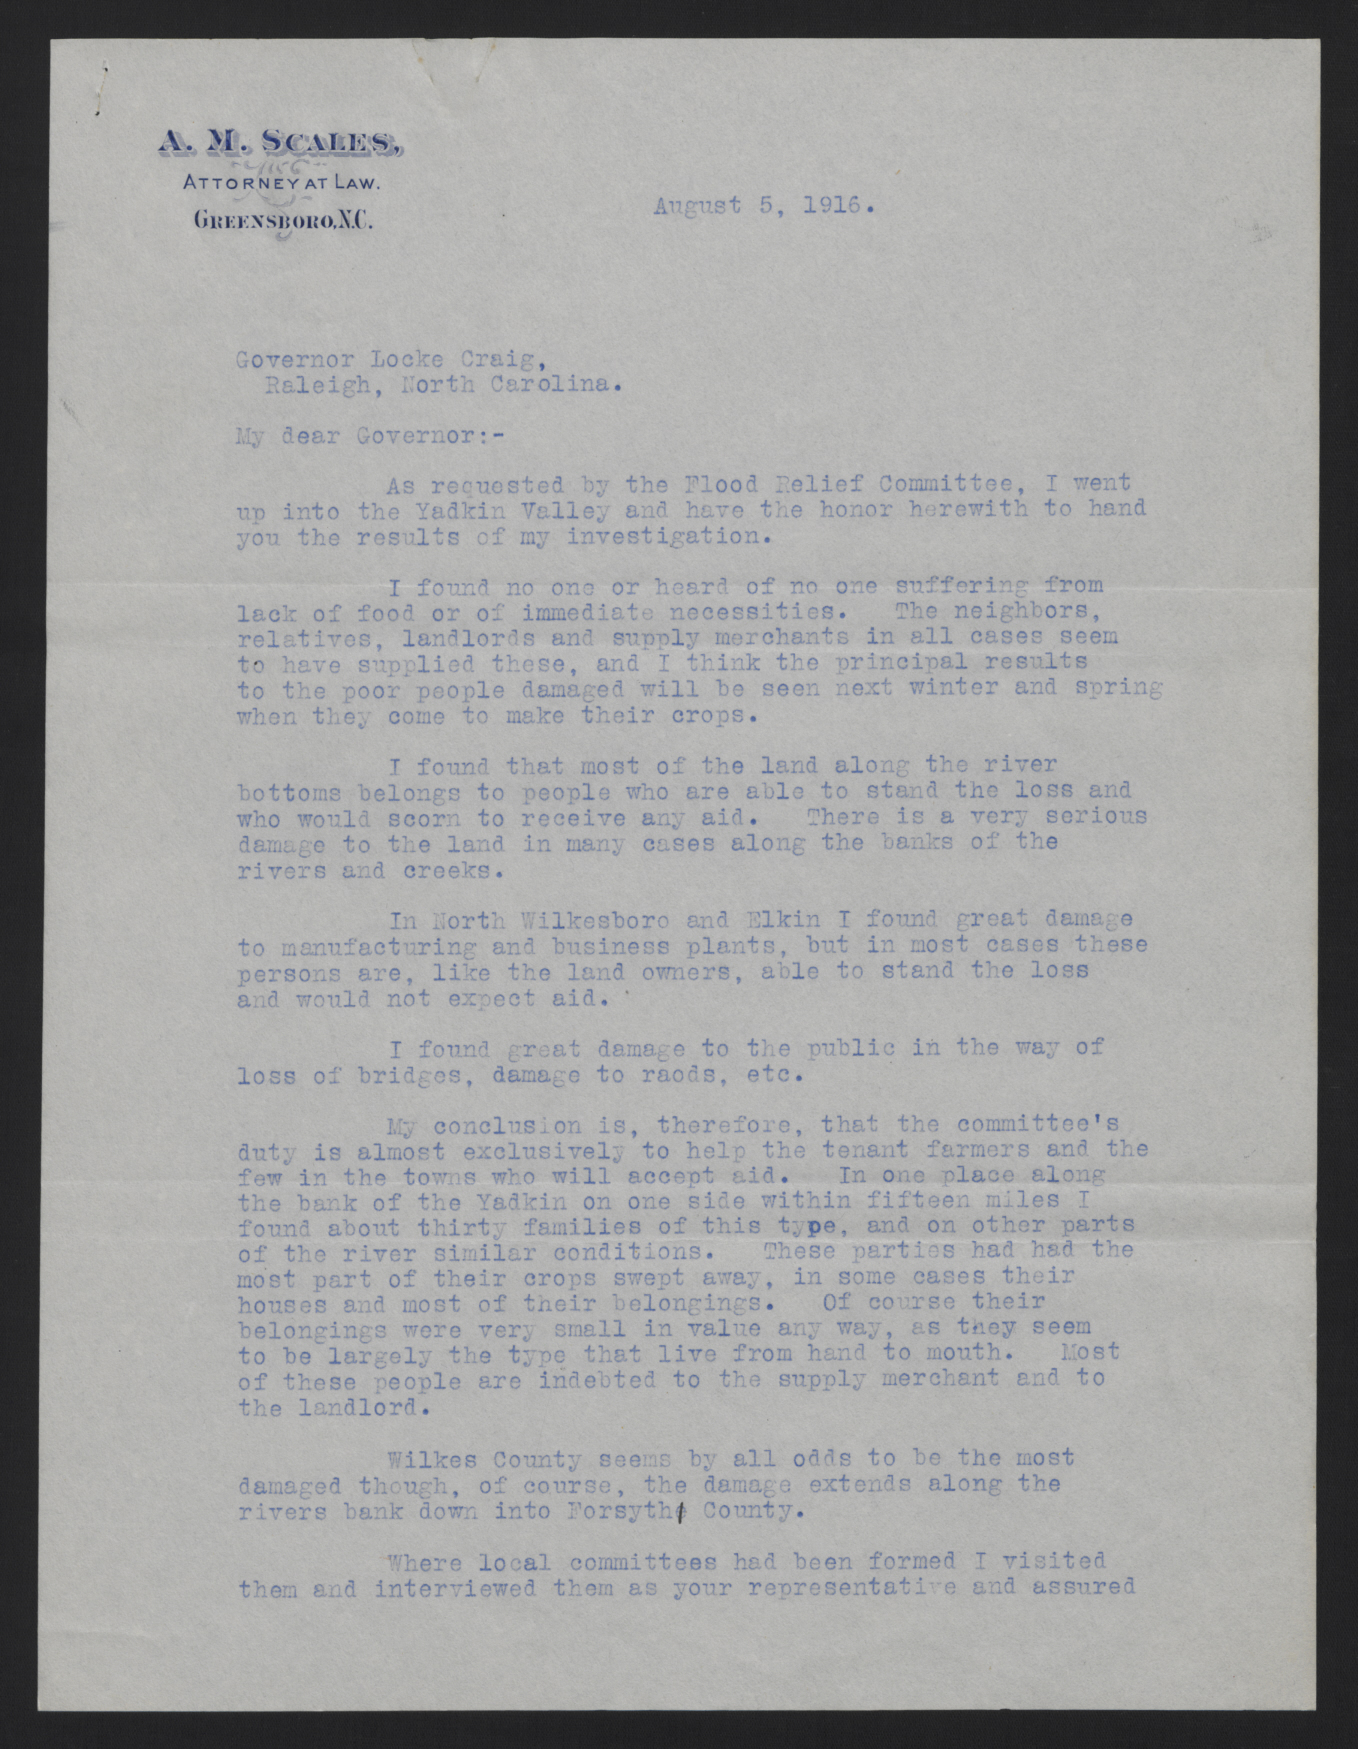 Letter from Scales to Craig, August 5, 1916, page 1